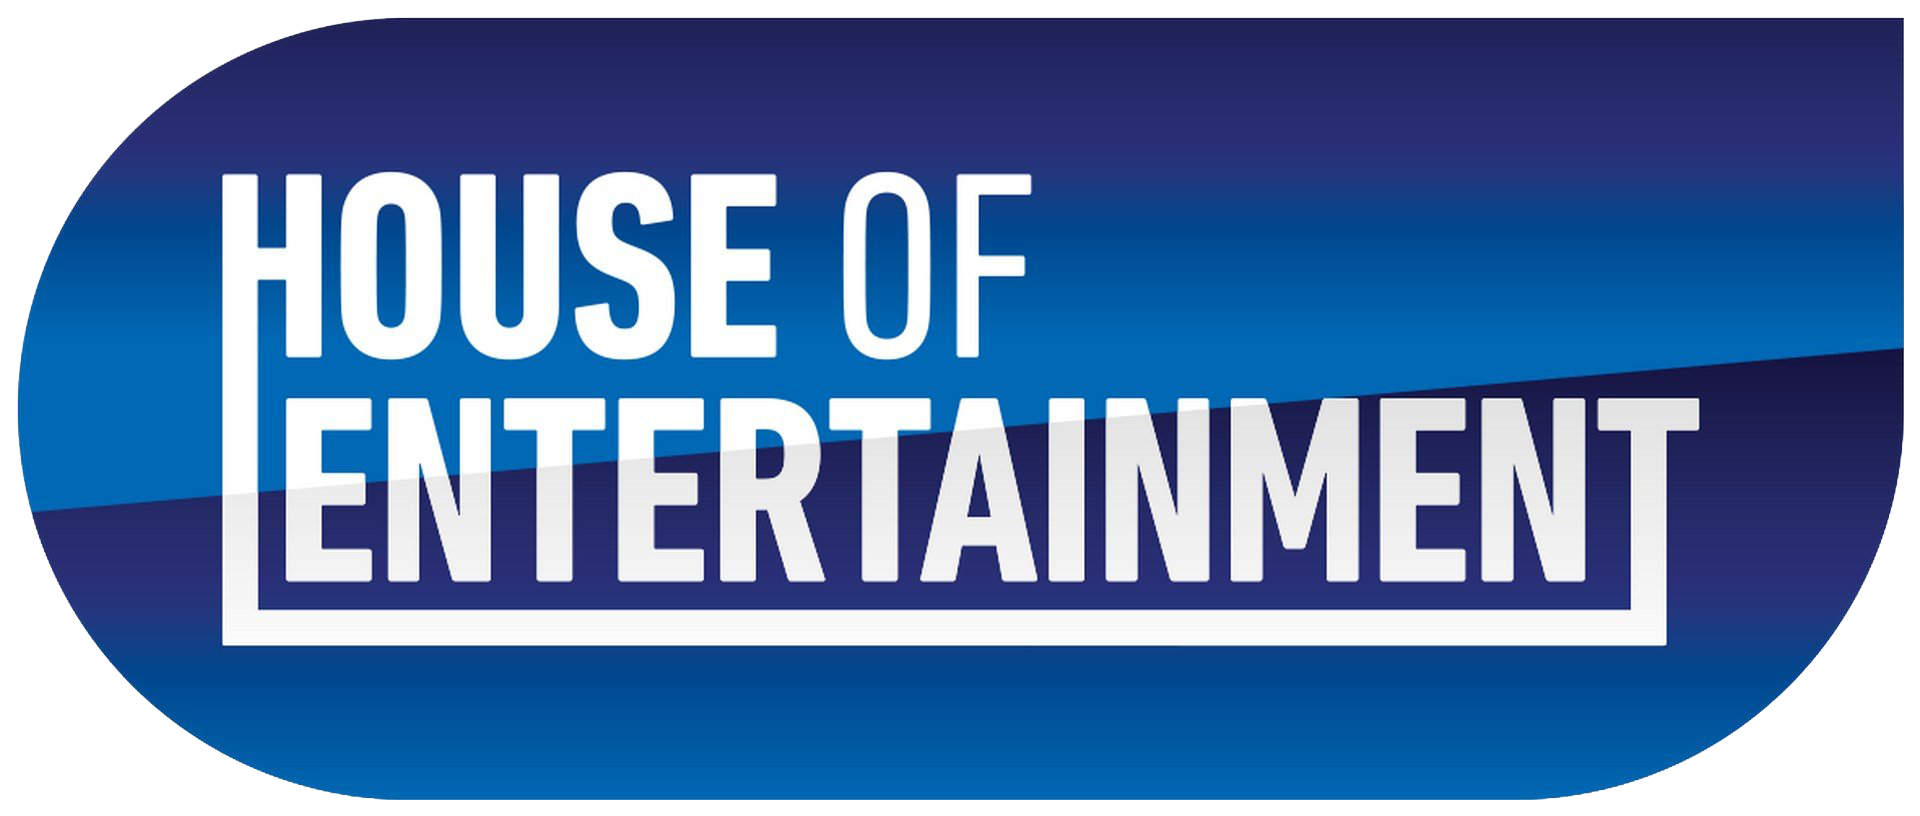 House Of Entertainment